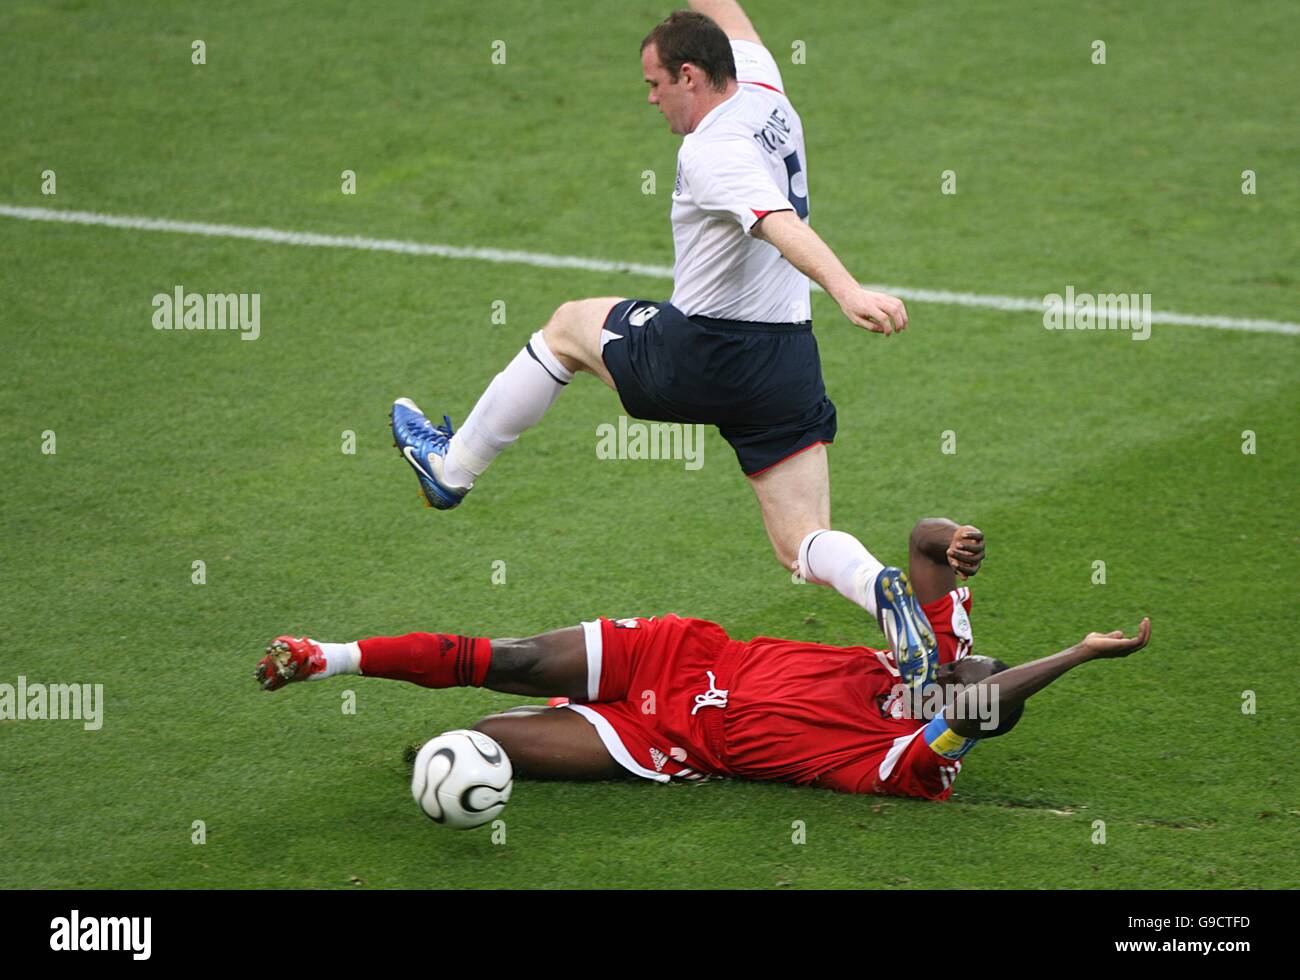 England's Wayne Rooney skips the challenge of Trinidad and Tobago's Dwight Yorke Stock Photo